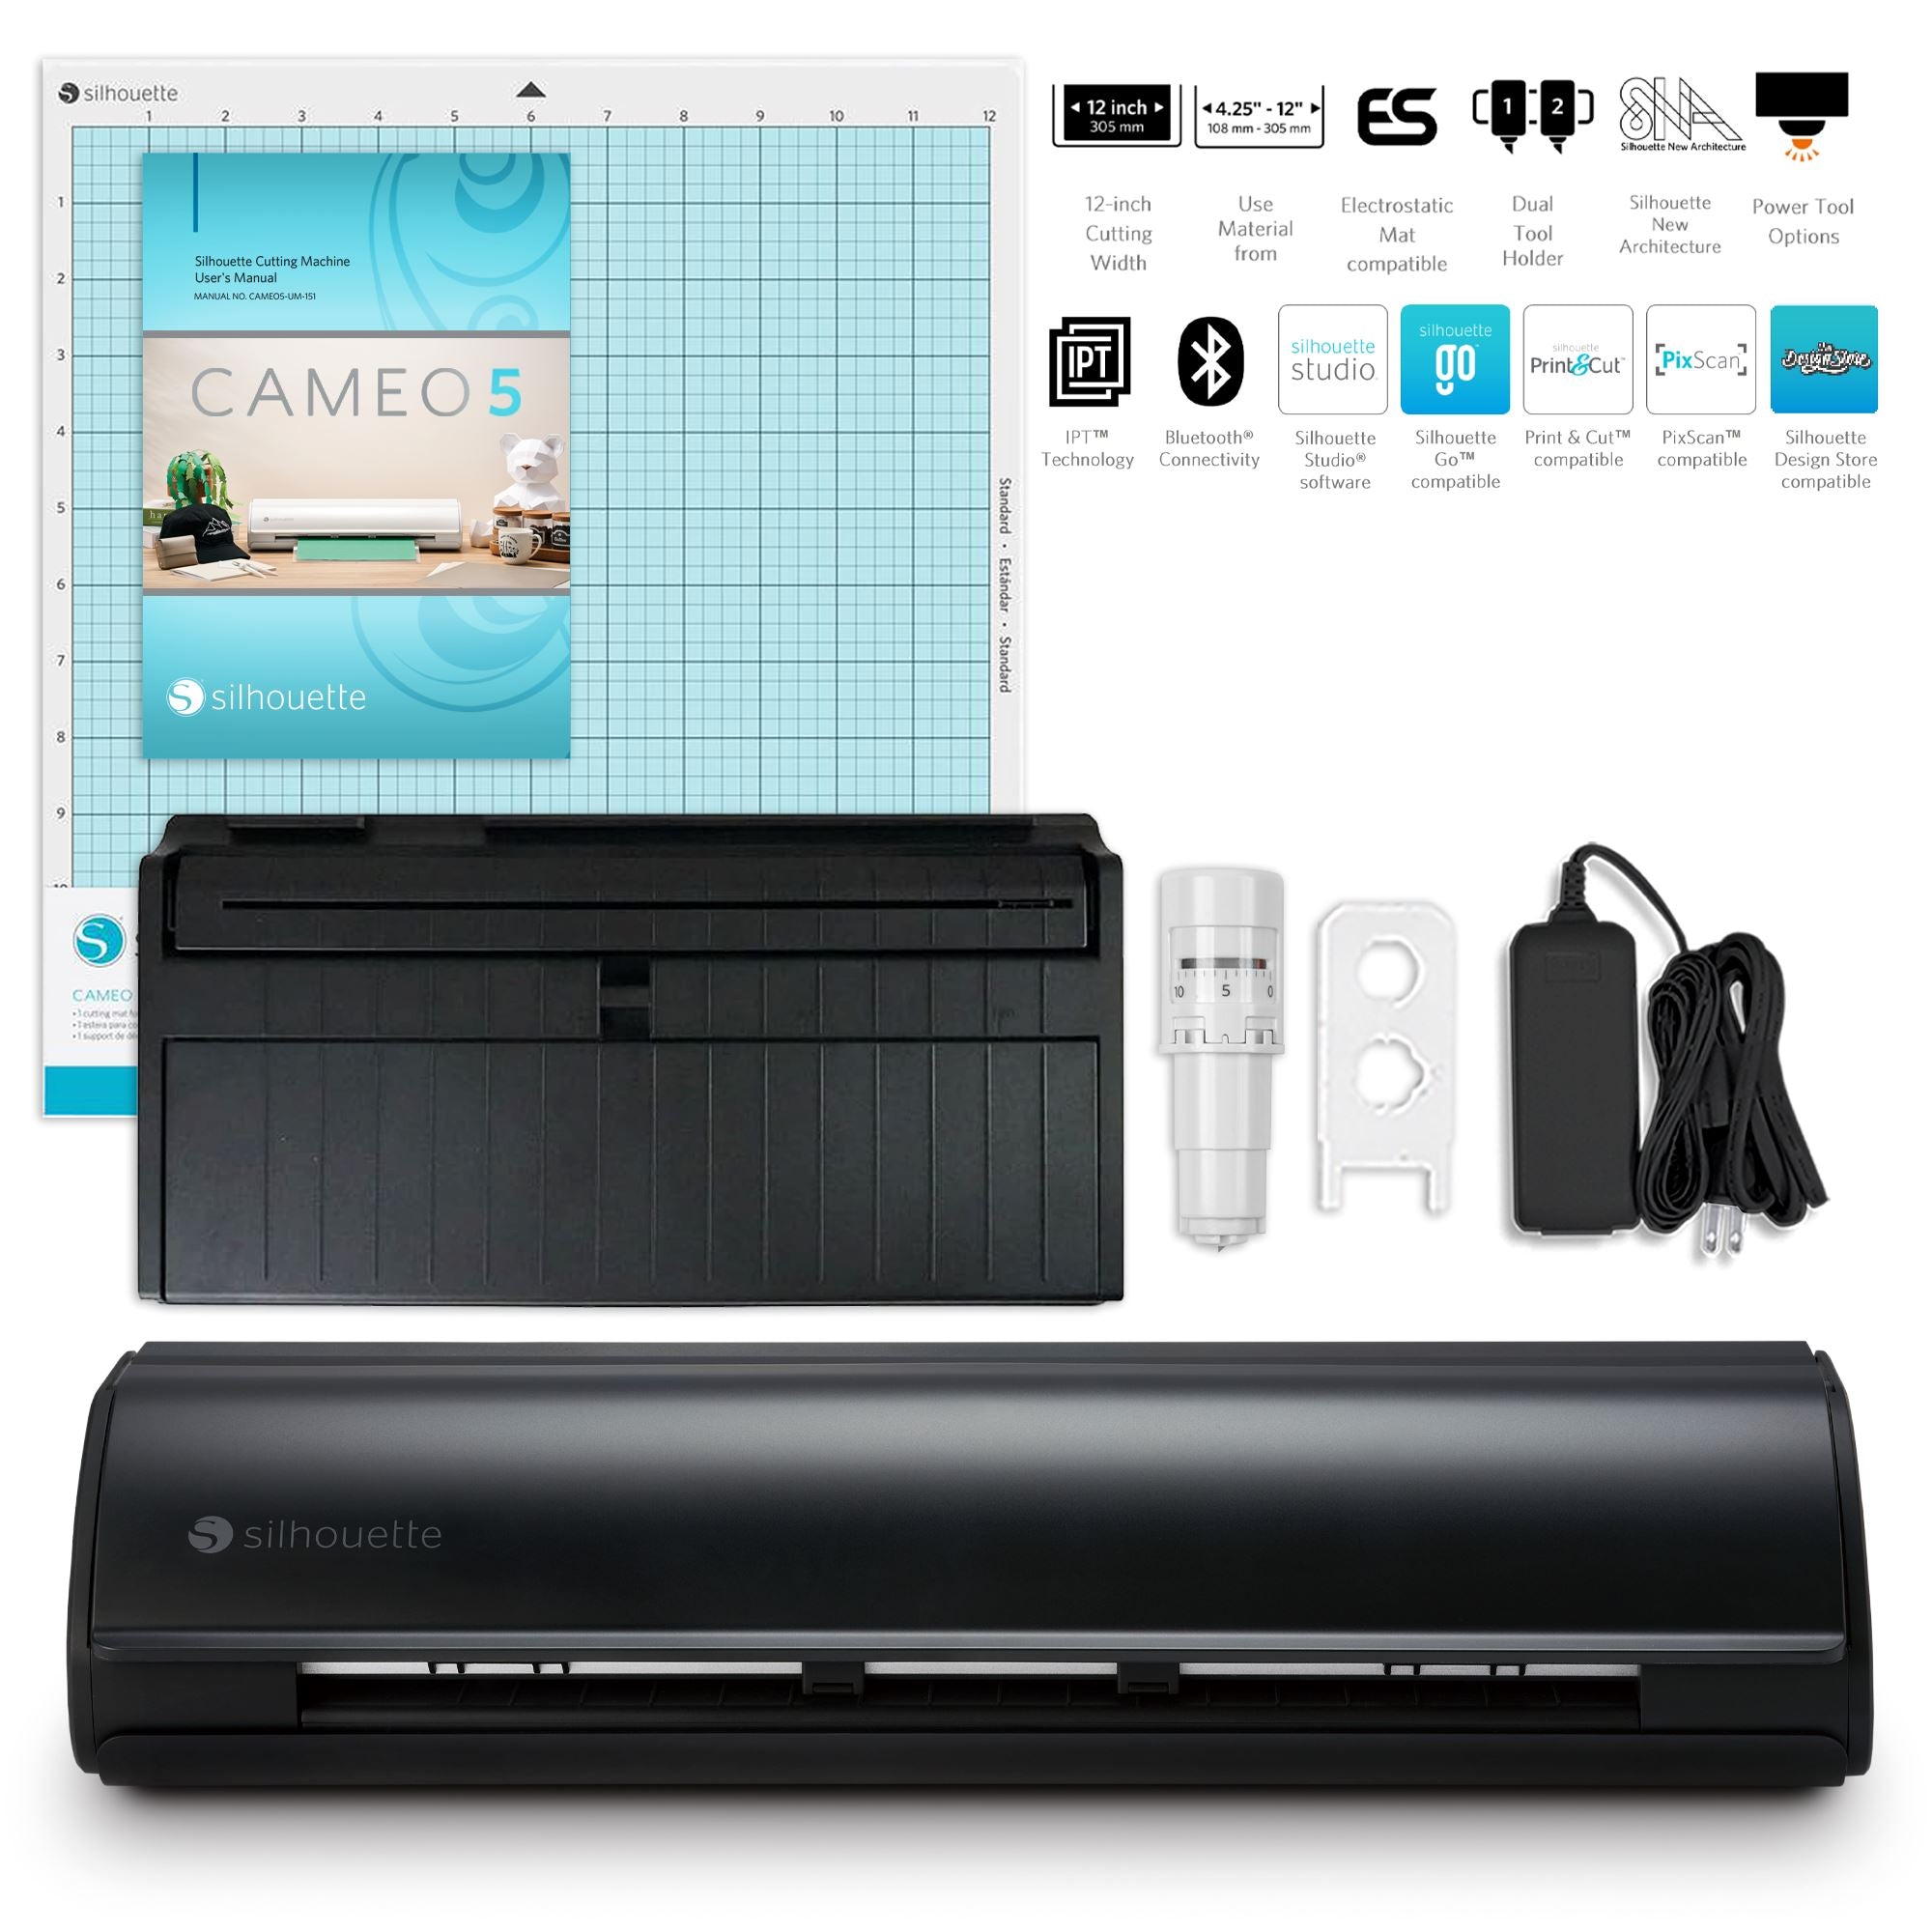 Silhouette Matte Black Cameo 5 - 12 Vinyl Cutter with Roll Feeder